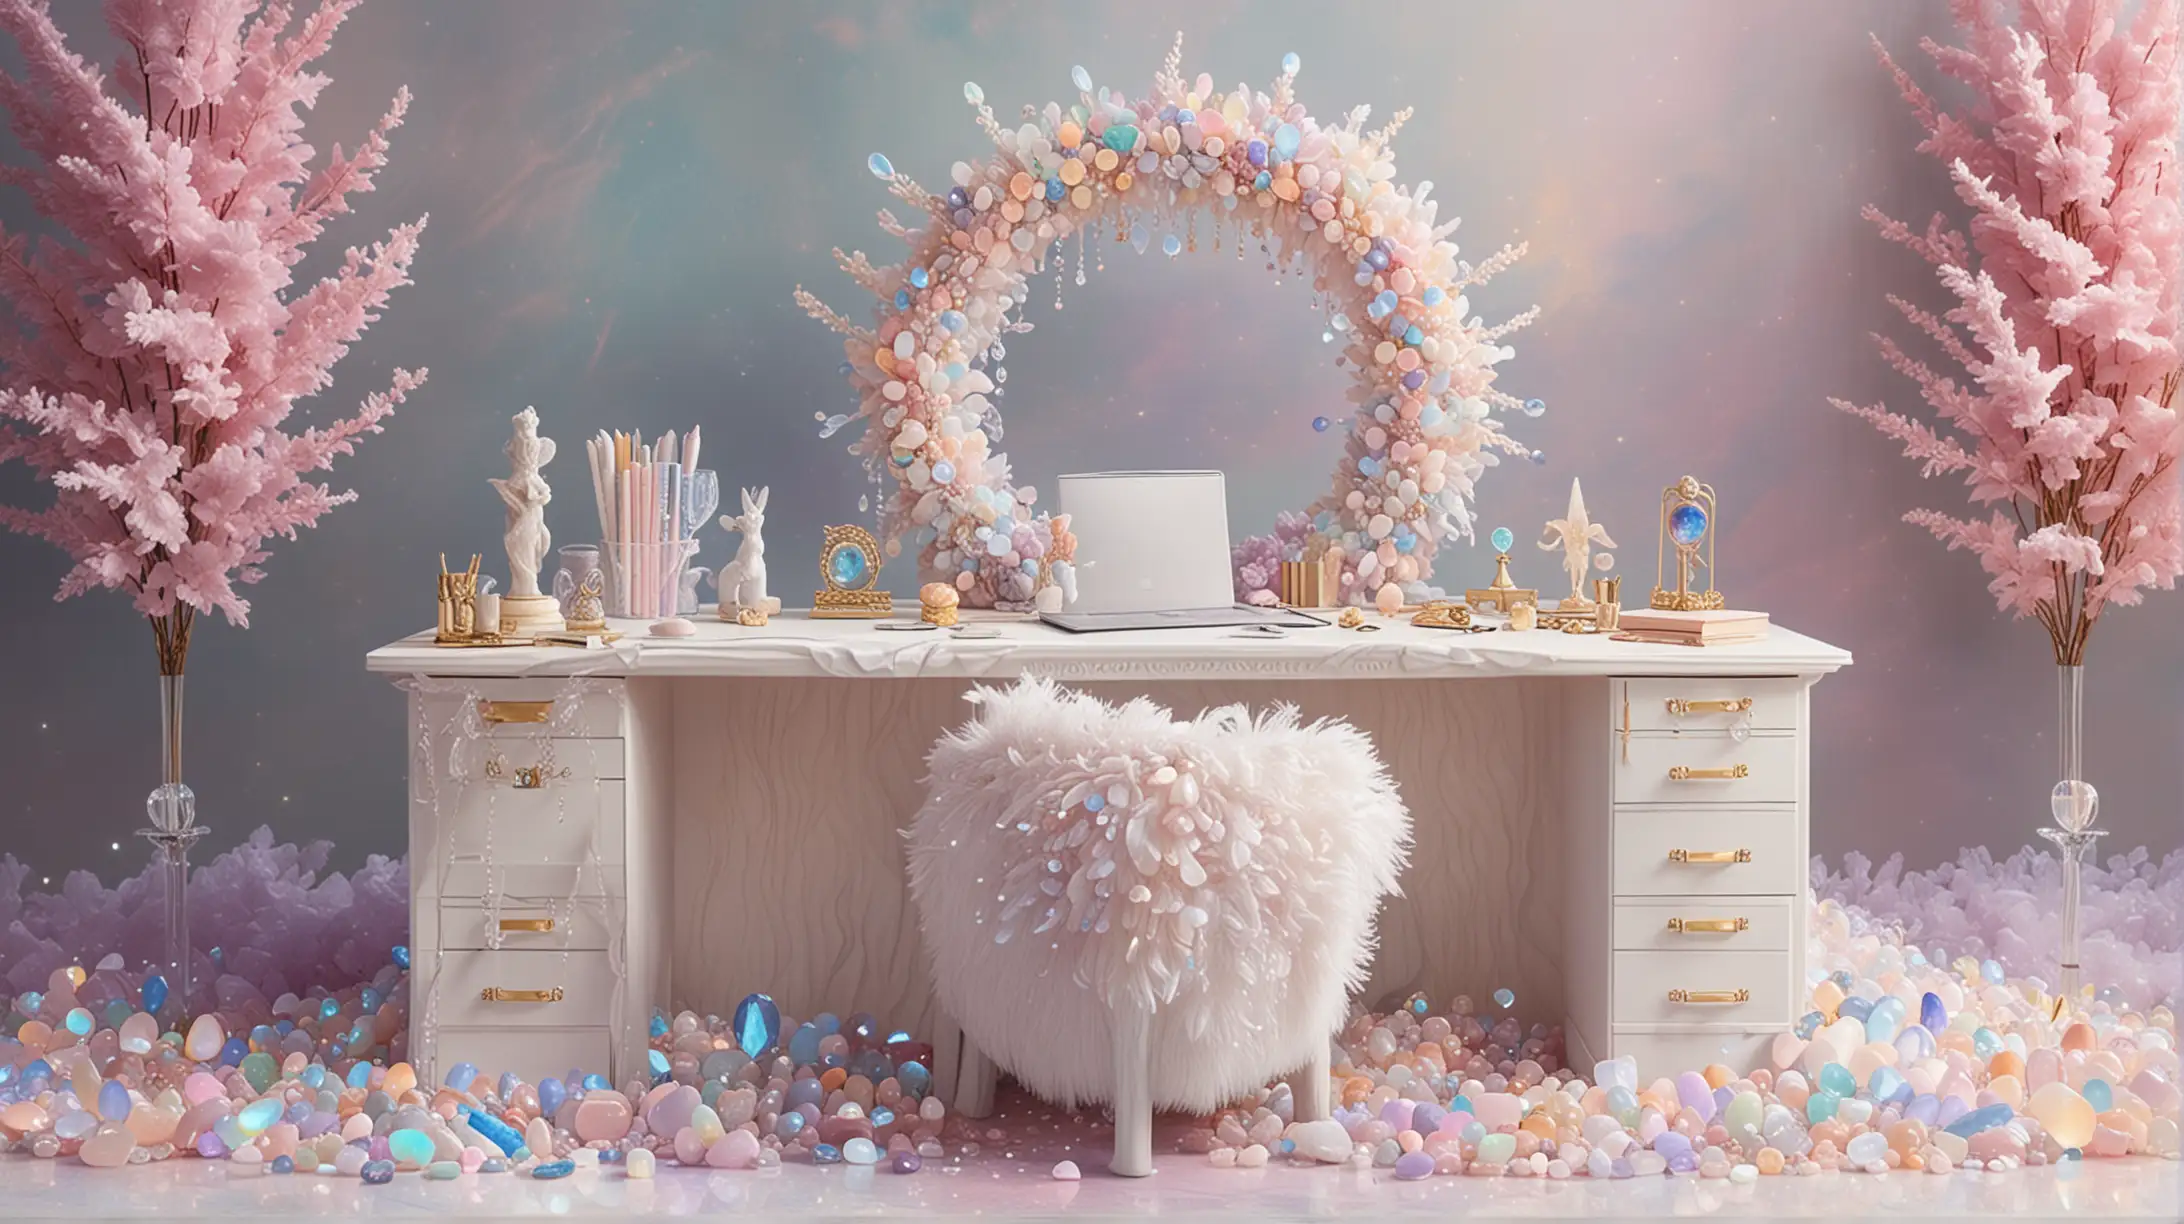 create a goddess's office, in pastel rainbow heaven, made entirely of opal, moonstones, and crystals